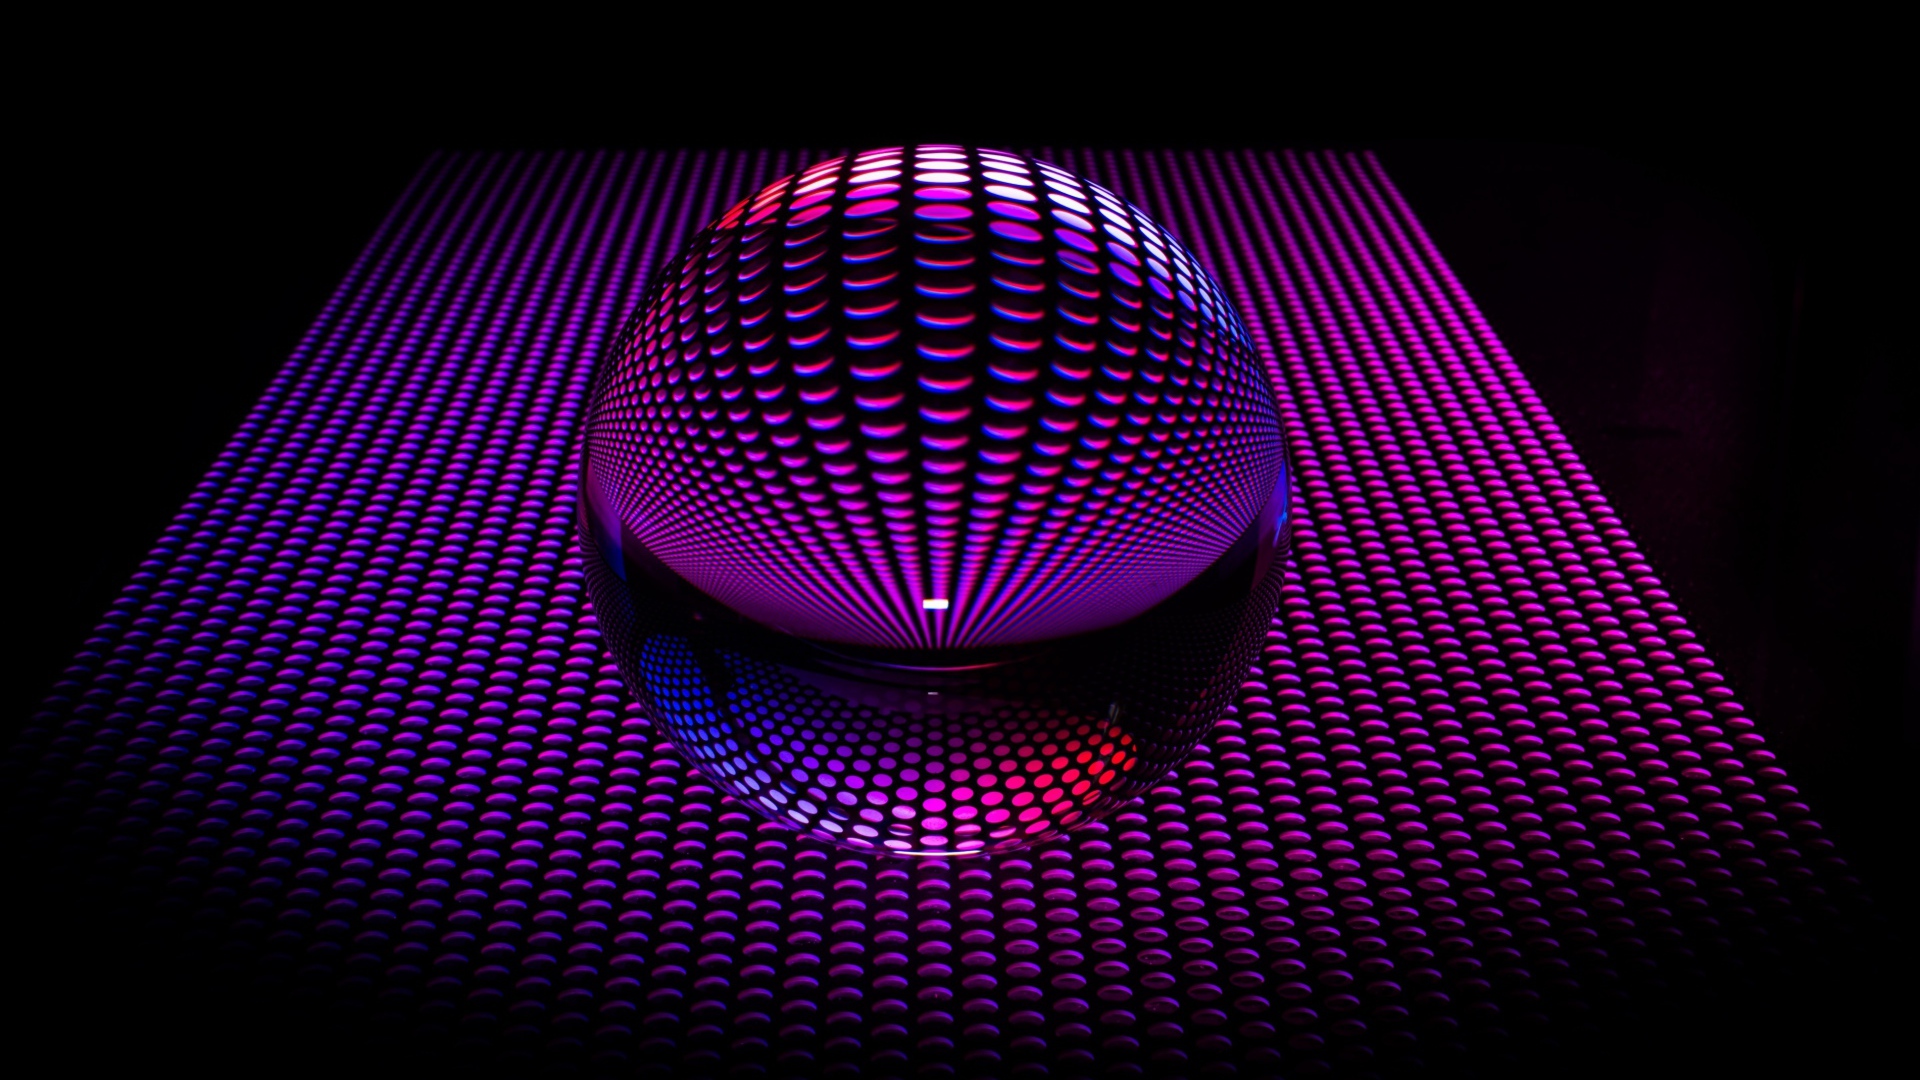 Large glass sphere on a purple background in 3D graphics